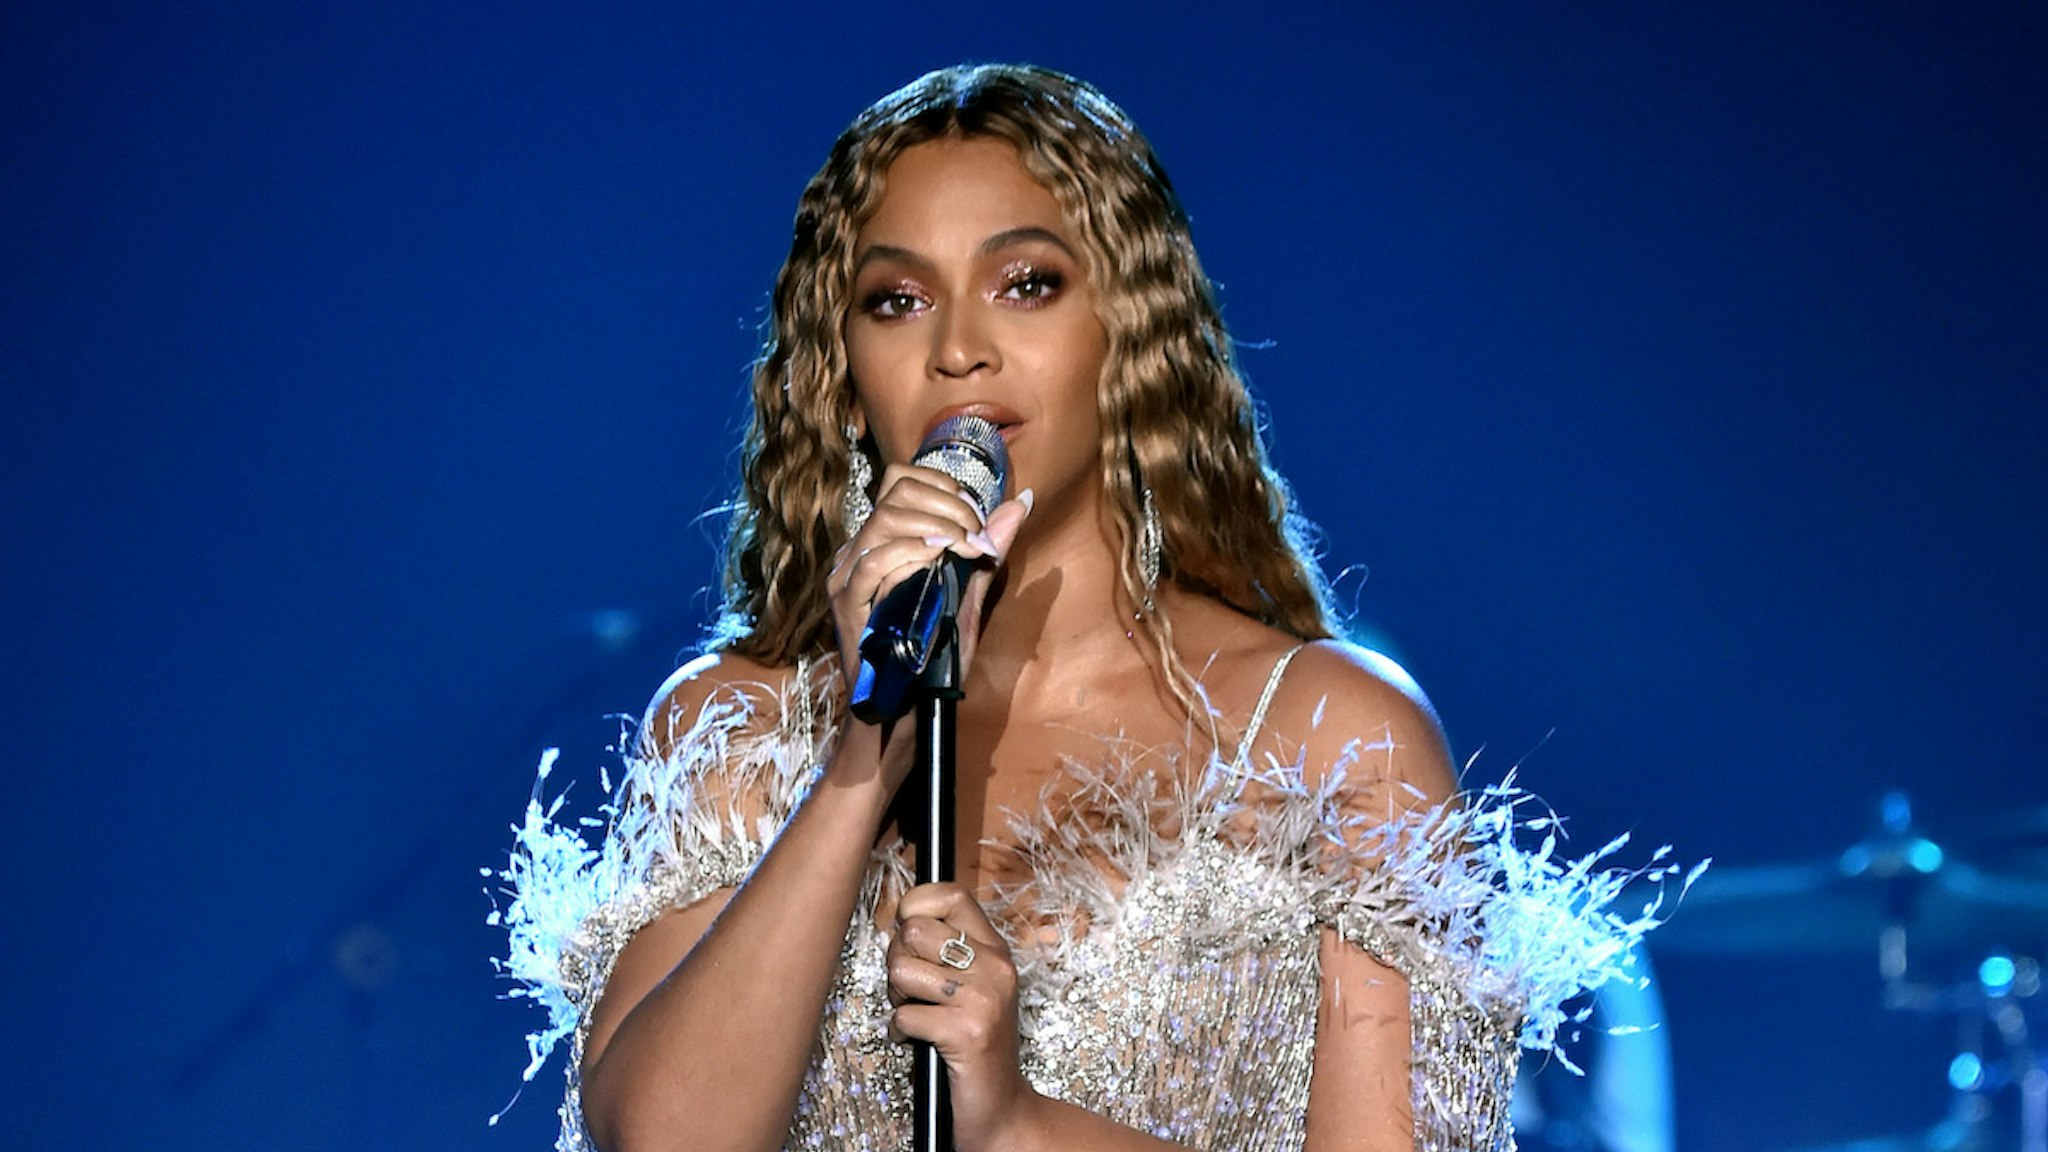 Beyonce performs onstage during the City of Hope Spirit of Life Gala 2018 at Barker Hangar on October 11, 2018 in Santa Monica, California. (Photo by Kevin Mazur/Getty Images for City of Hope)